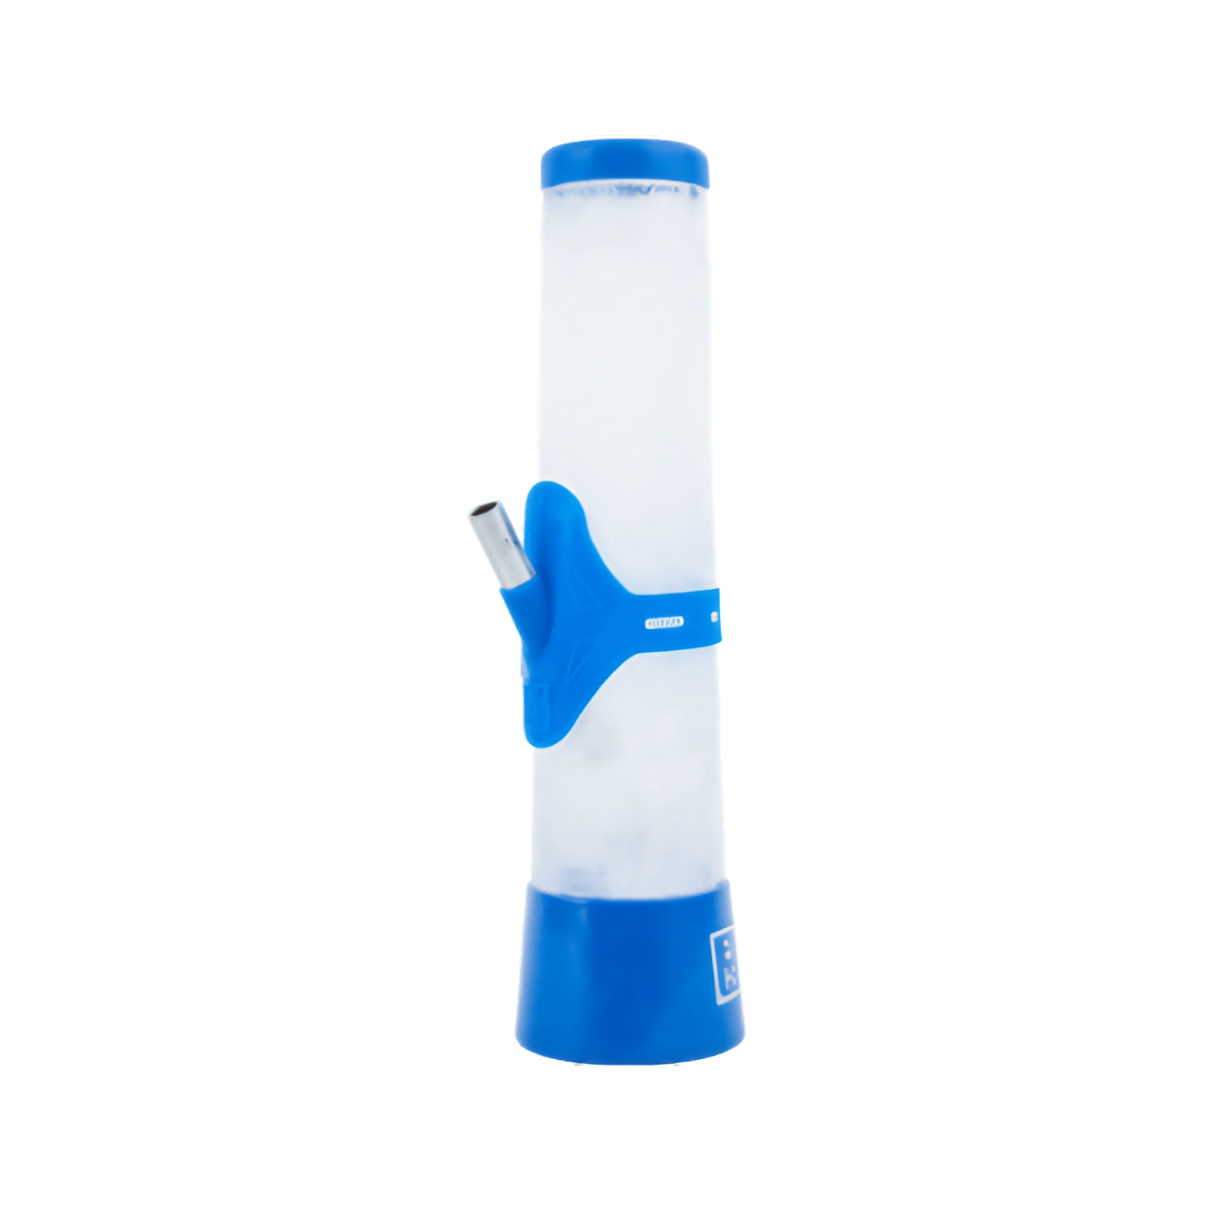 EYCE 2.0 Silicone Bong, Portable 12.75" Straight Design, for Dry Herbs, Front View